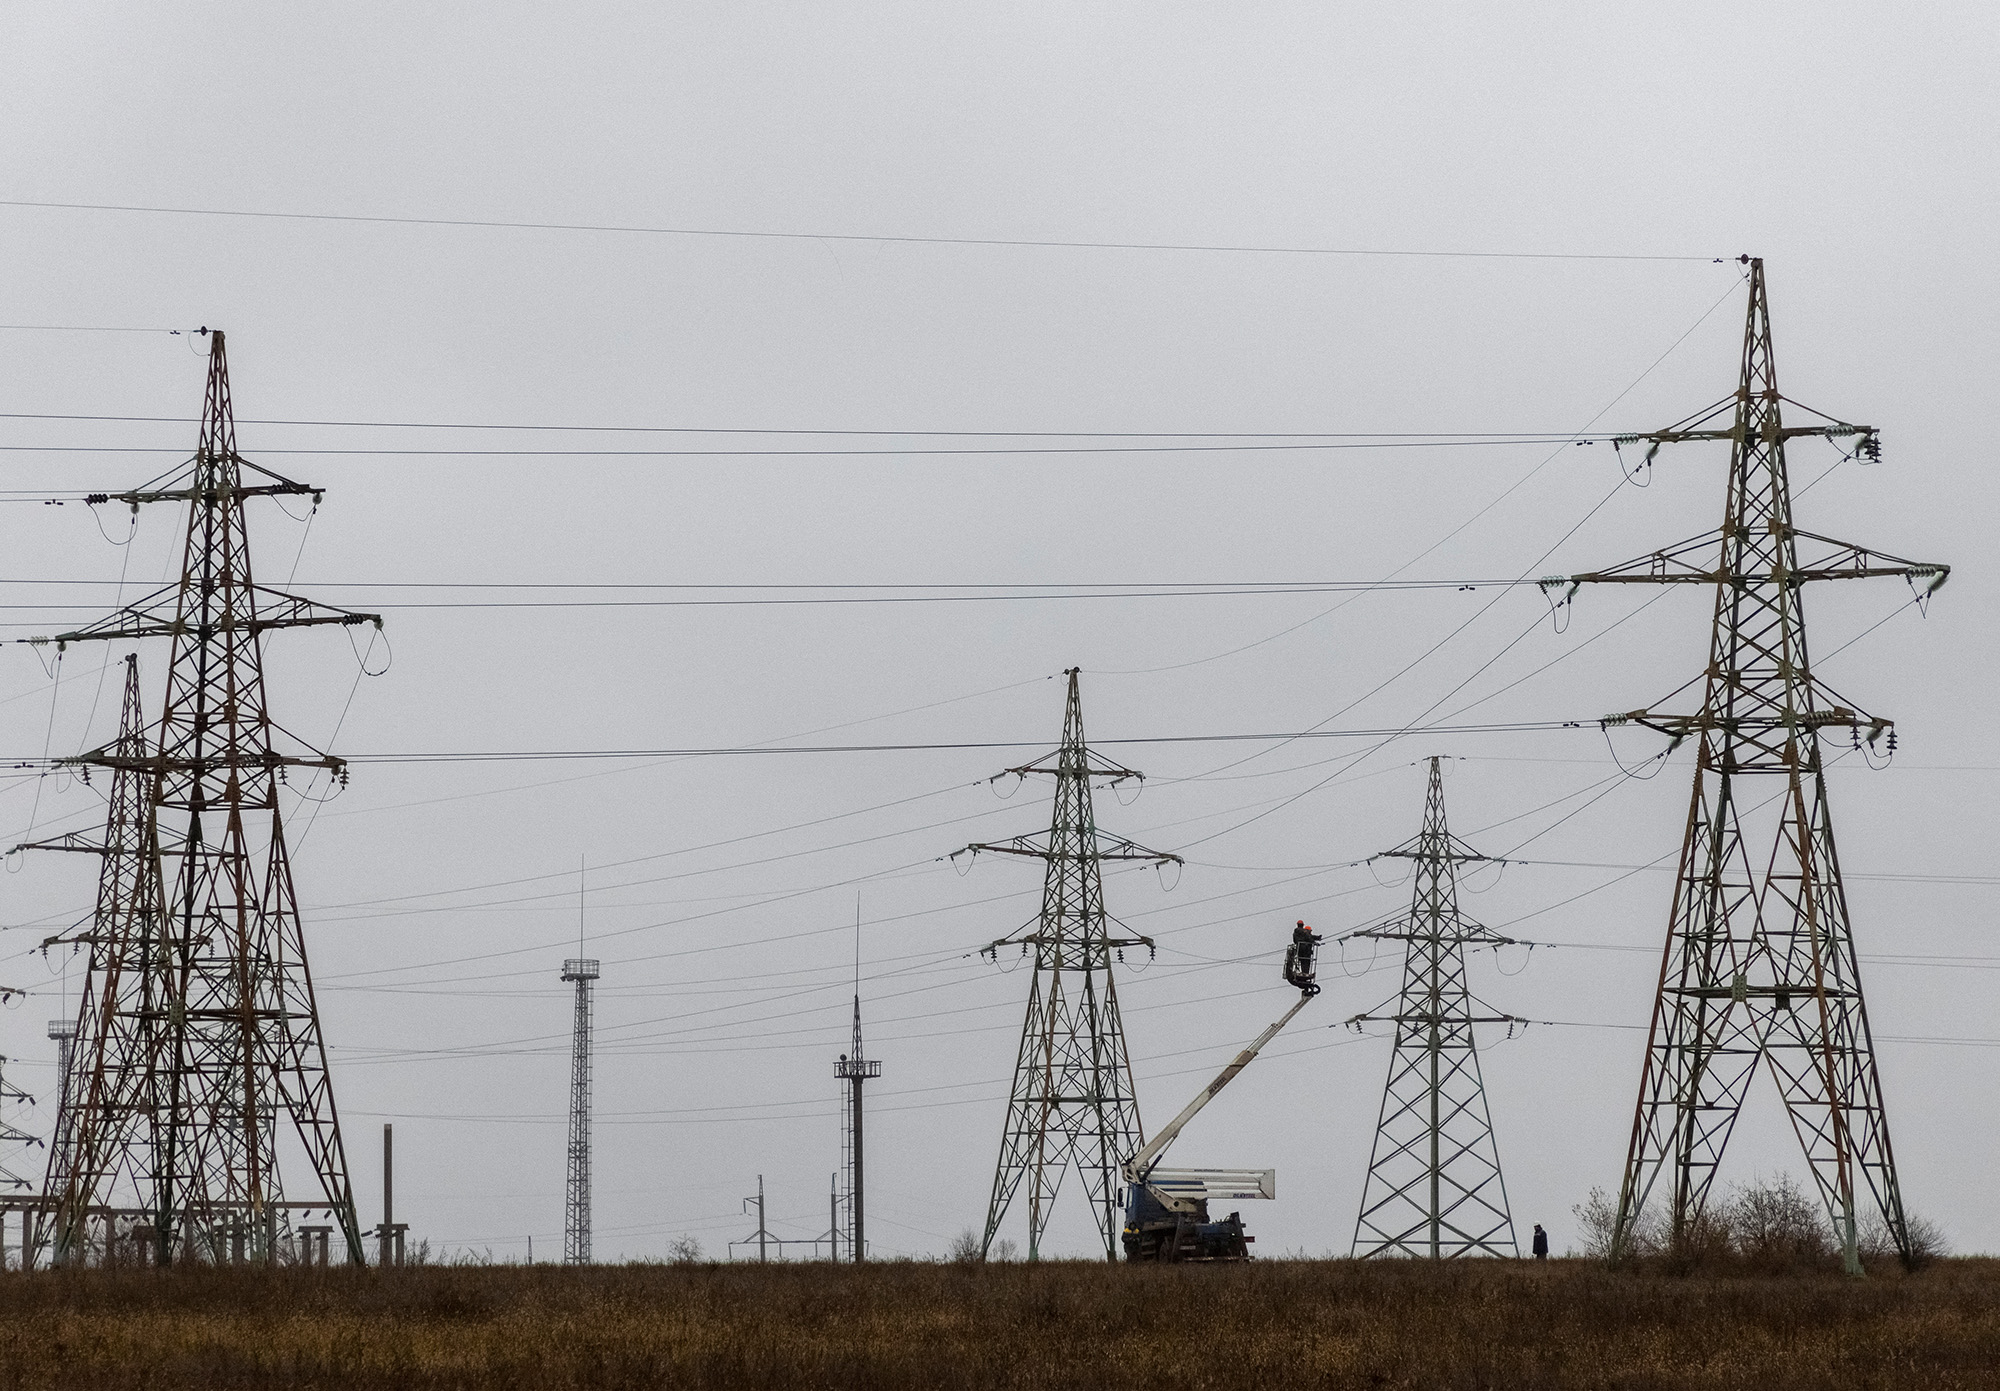 Employees remain electric power lines damaged by Russian military strikes in the Kherson region, Ukraine, on November 30.